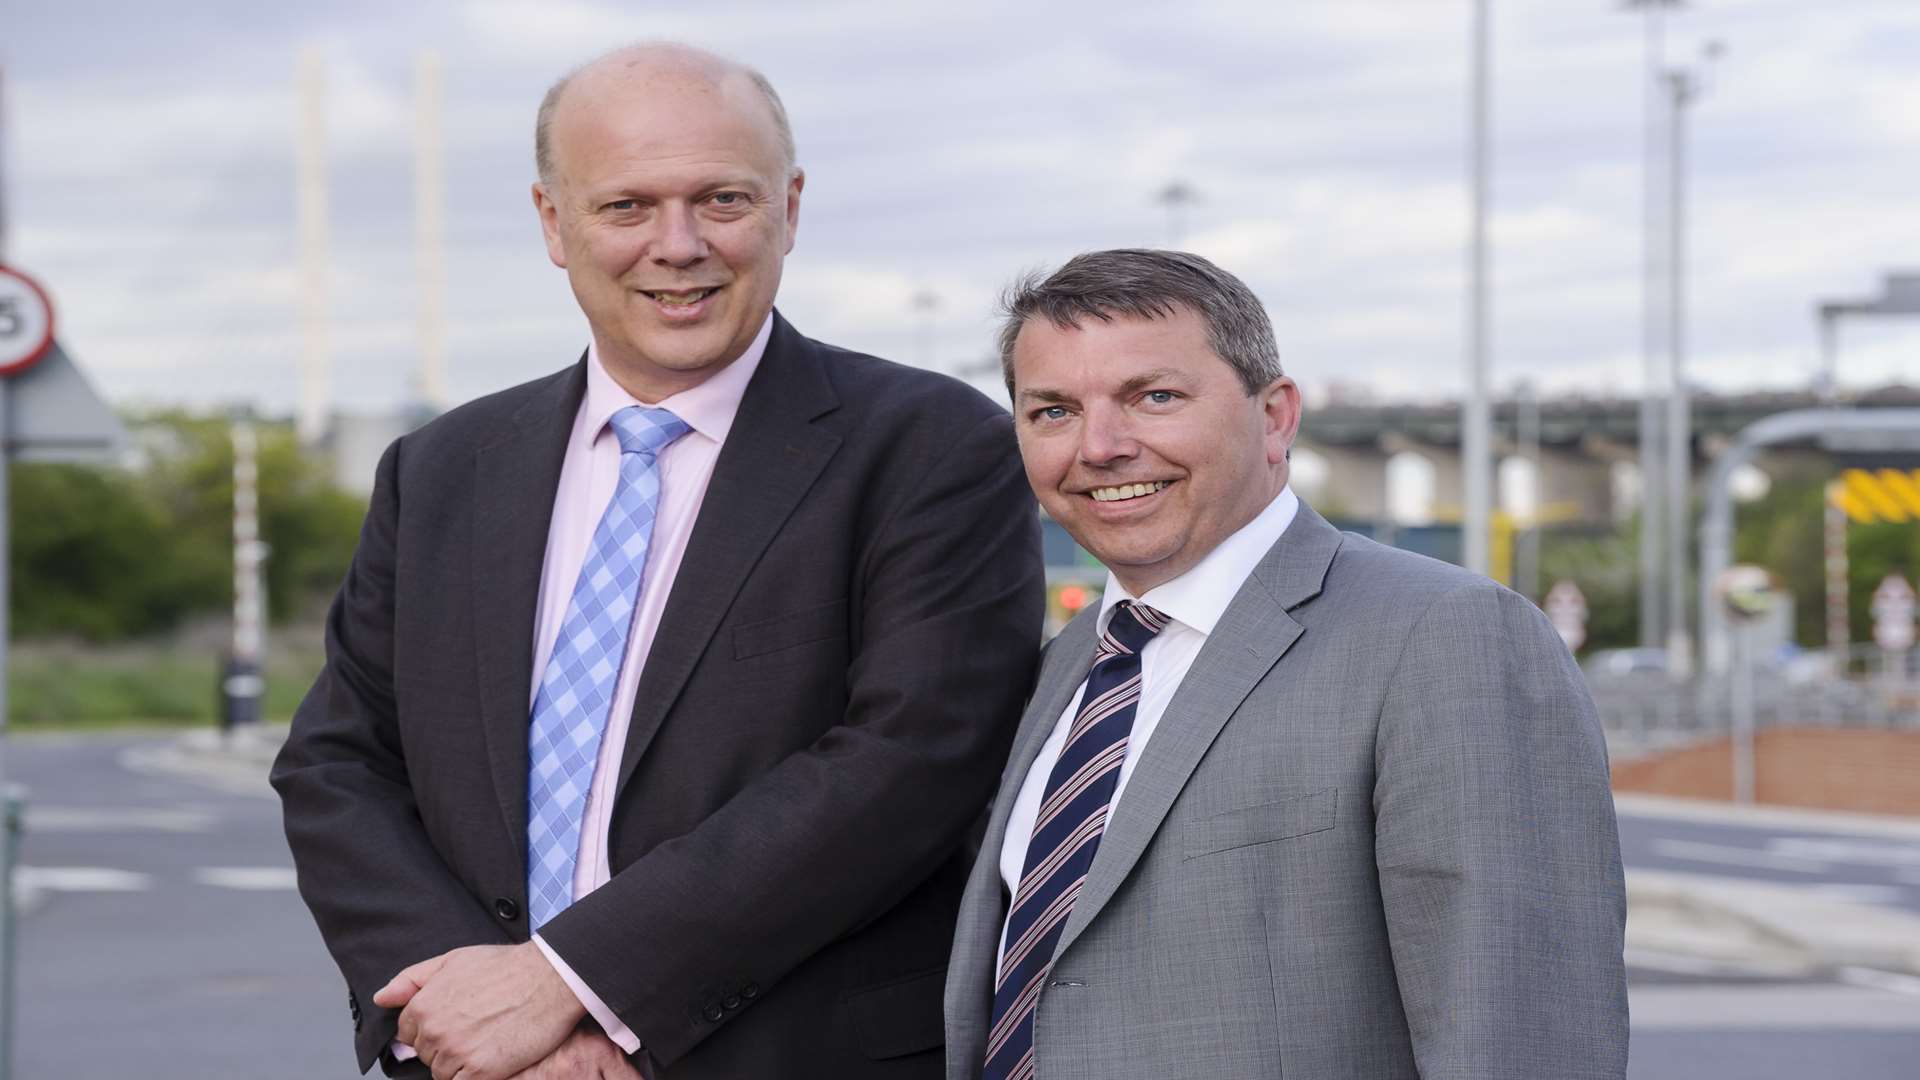 Chris Grayling and Gareth Johnson at the Dartford Crossing to announce the government's decision on the Lower Thames Crossing